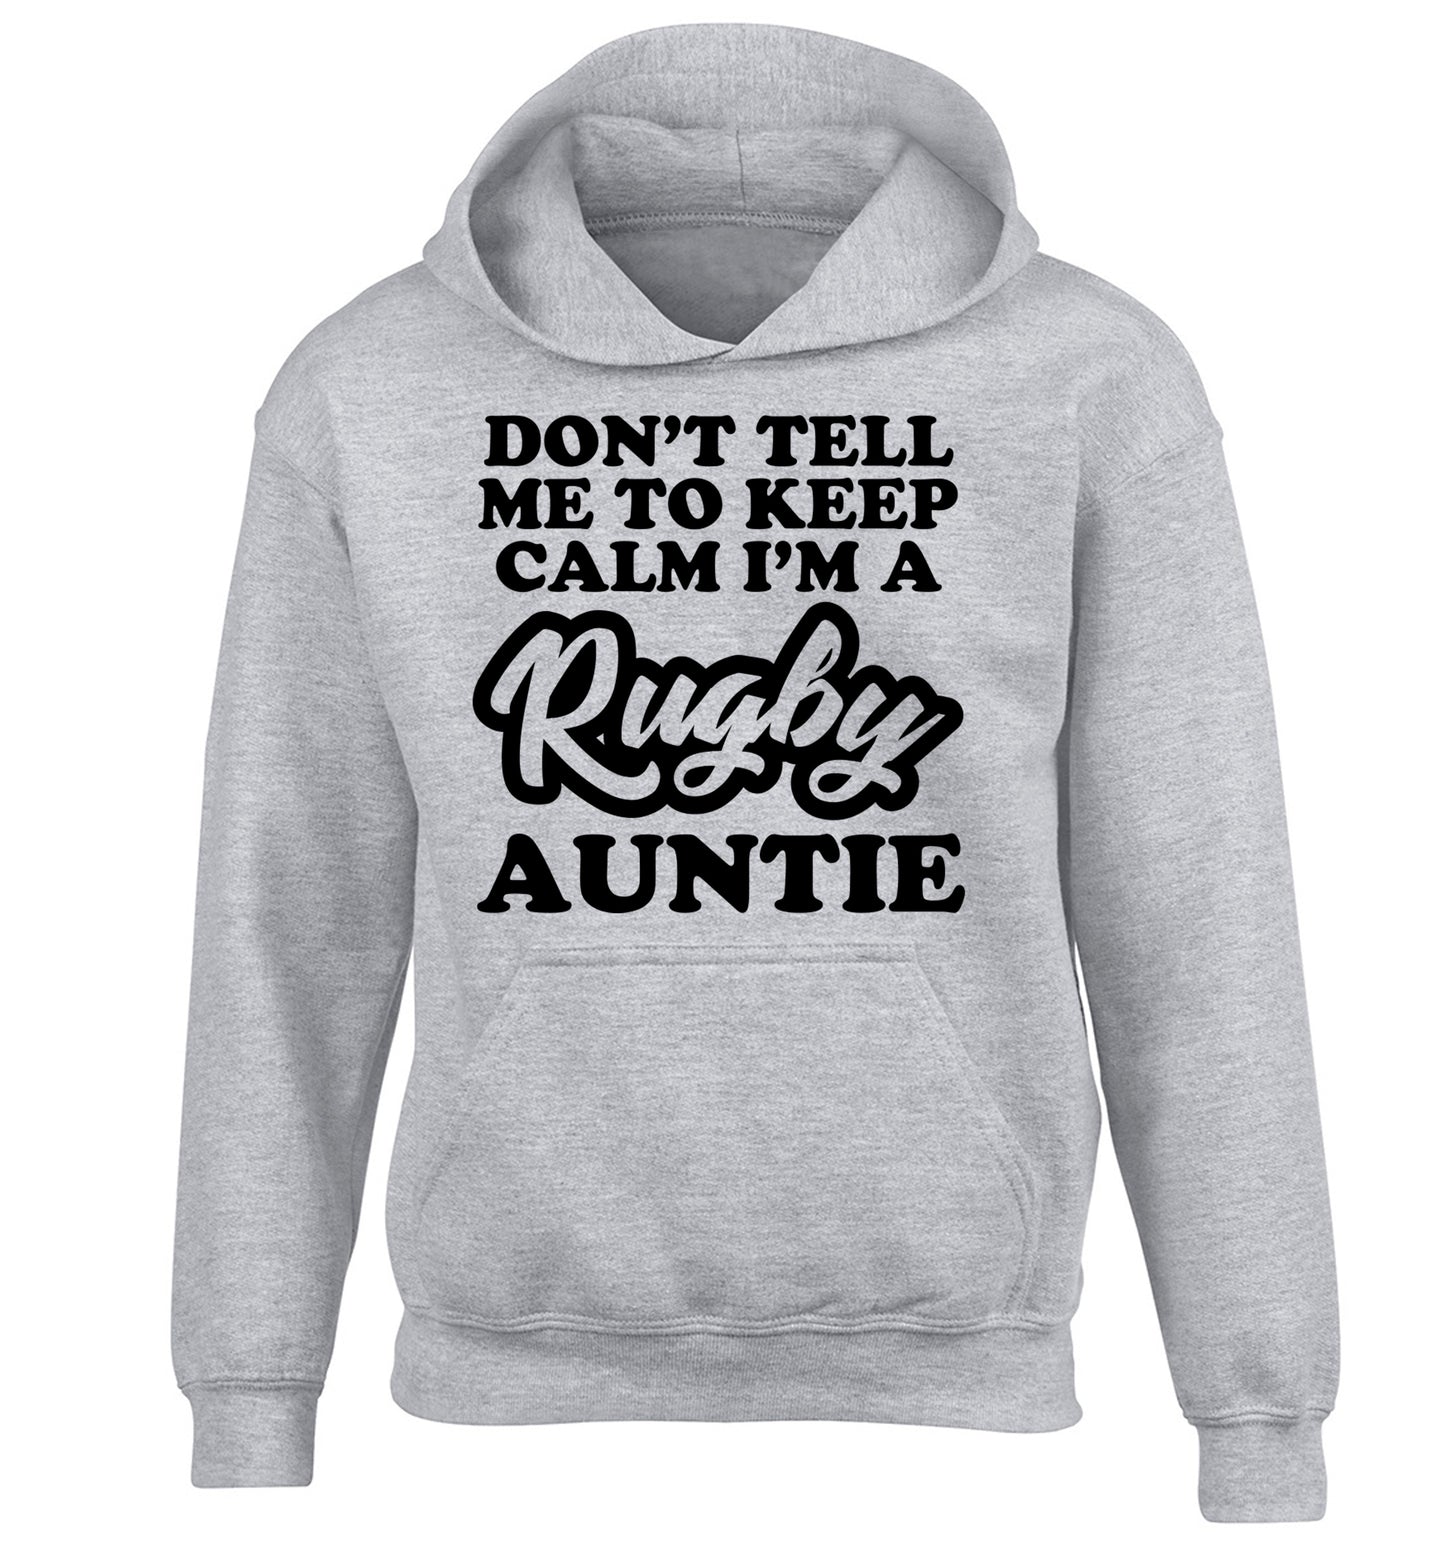 Don't tell me keep calm I'm a rugby auntie children's grey hoodie 12-13 Years